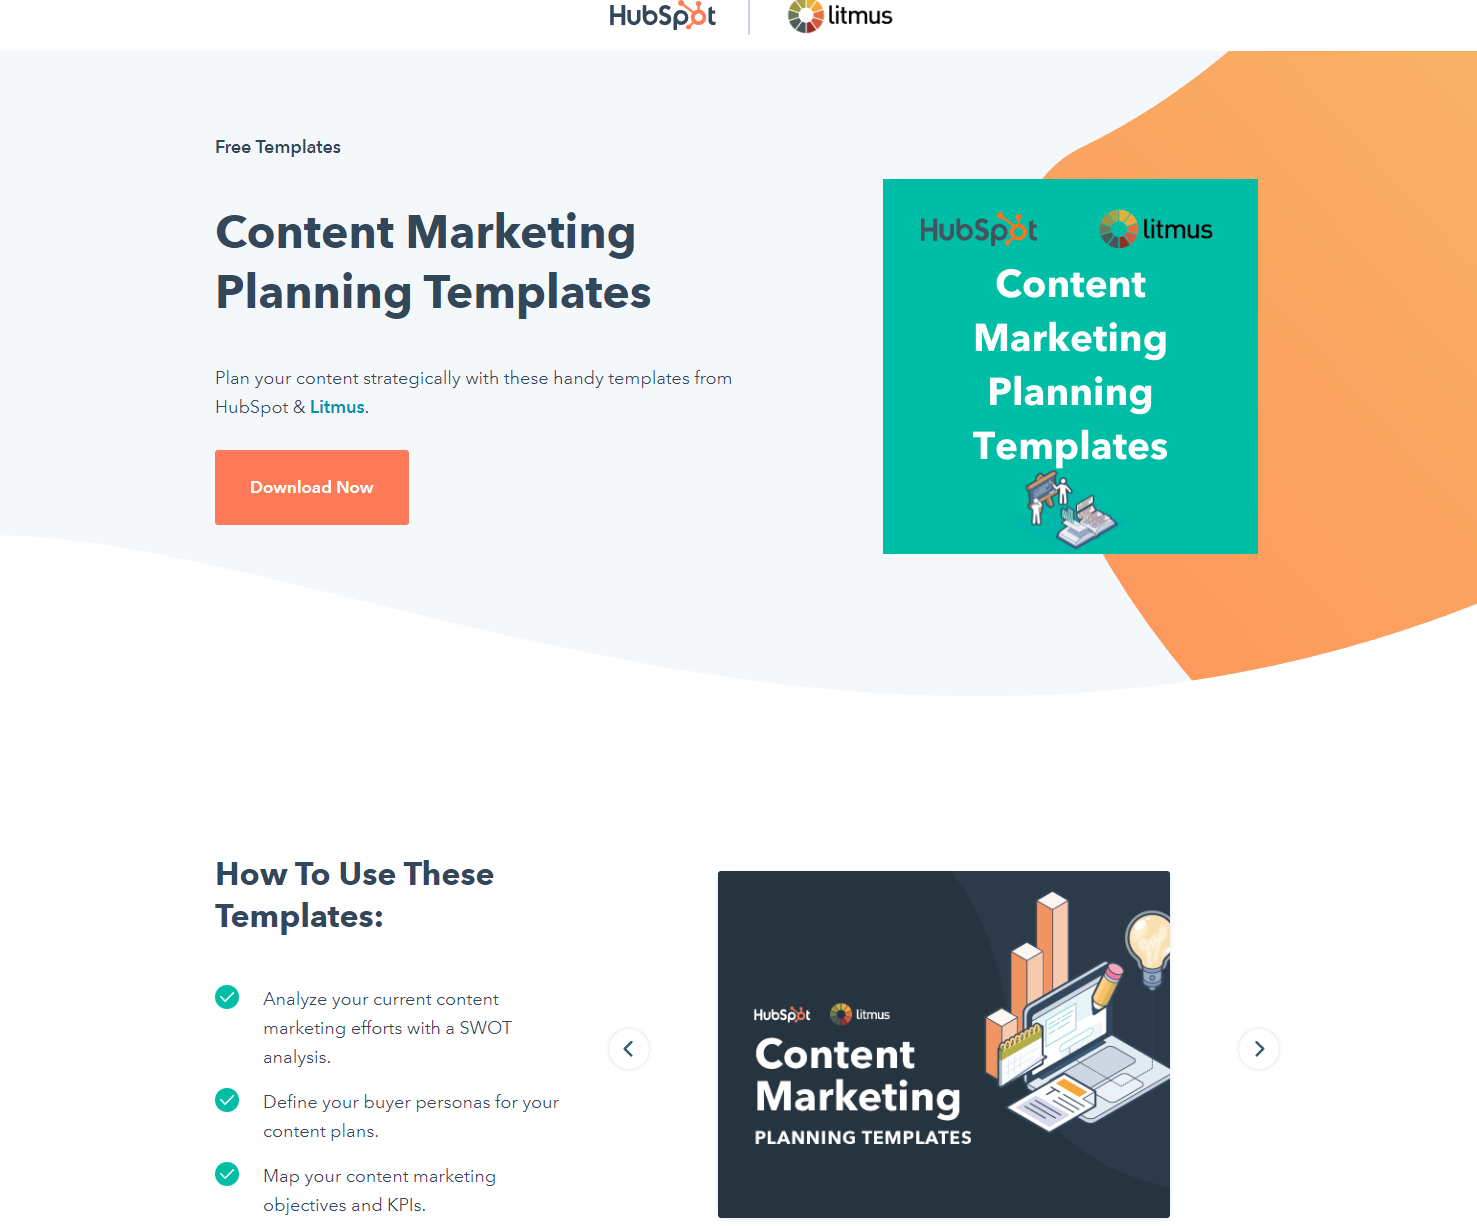 HubSpot's free content planning templates